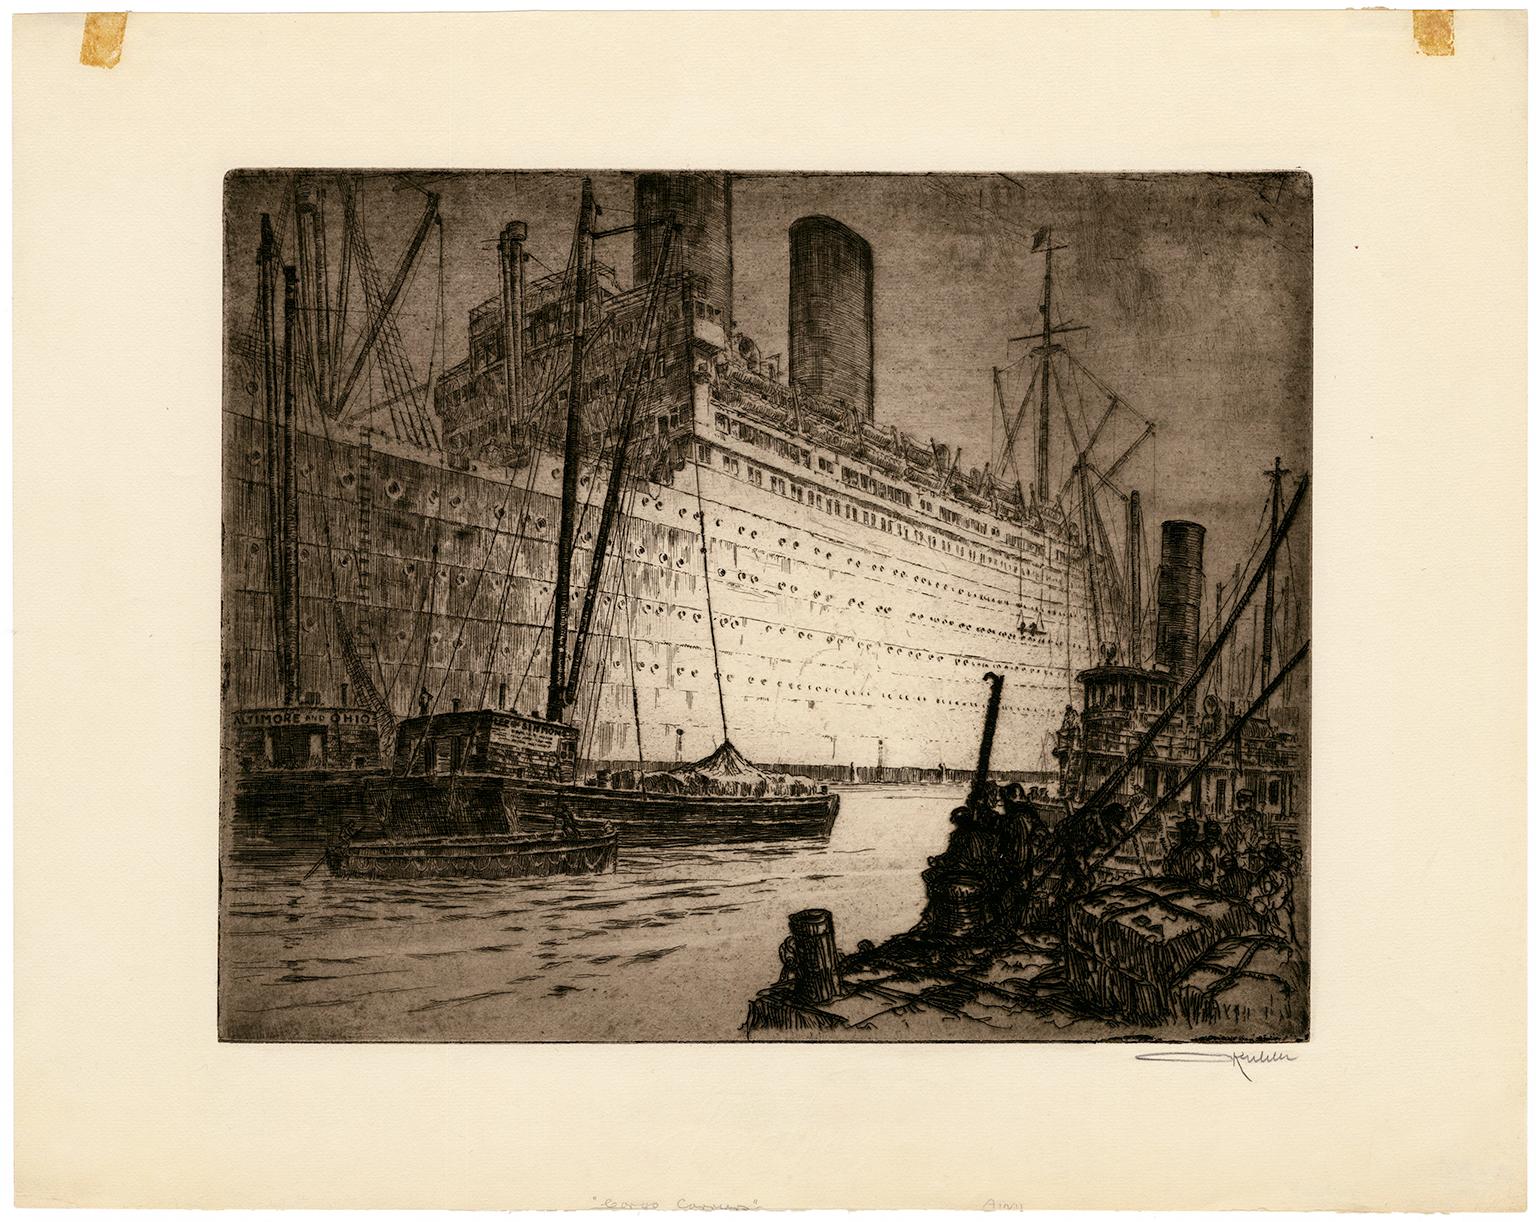 'Cargo Carriers' — 1930s New York Harbor - Print by Otto Kuhler